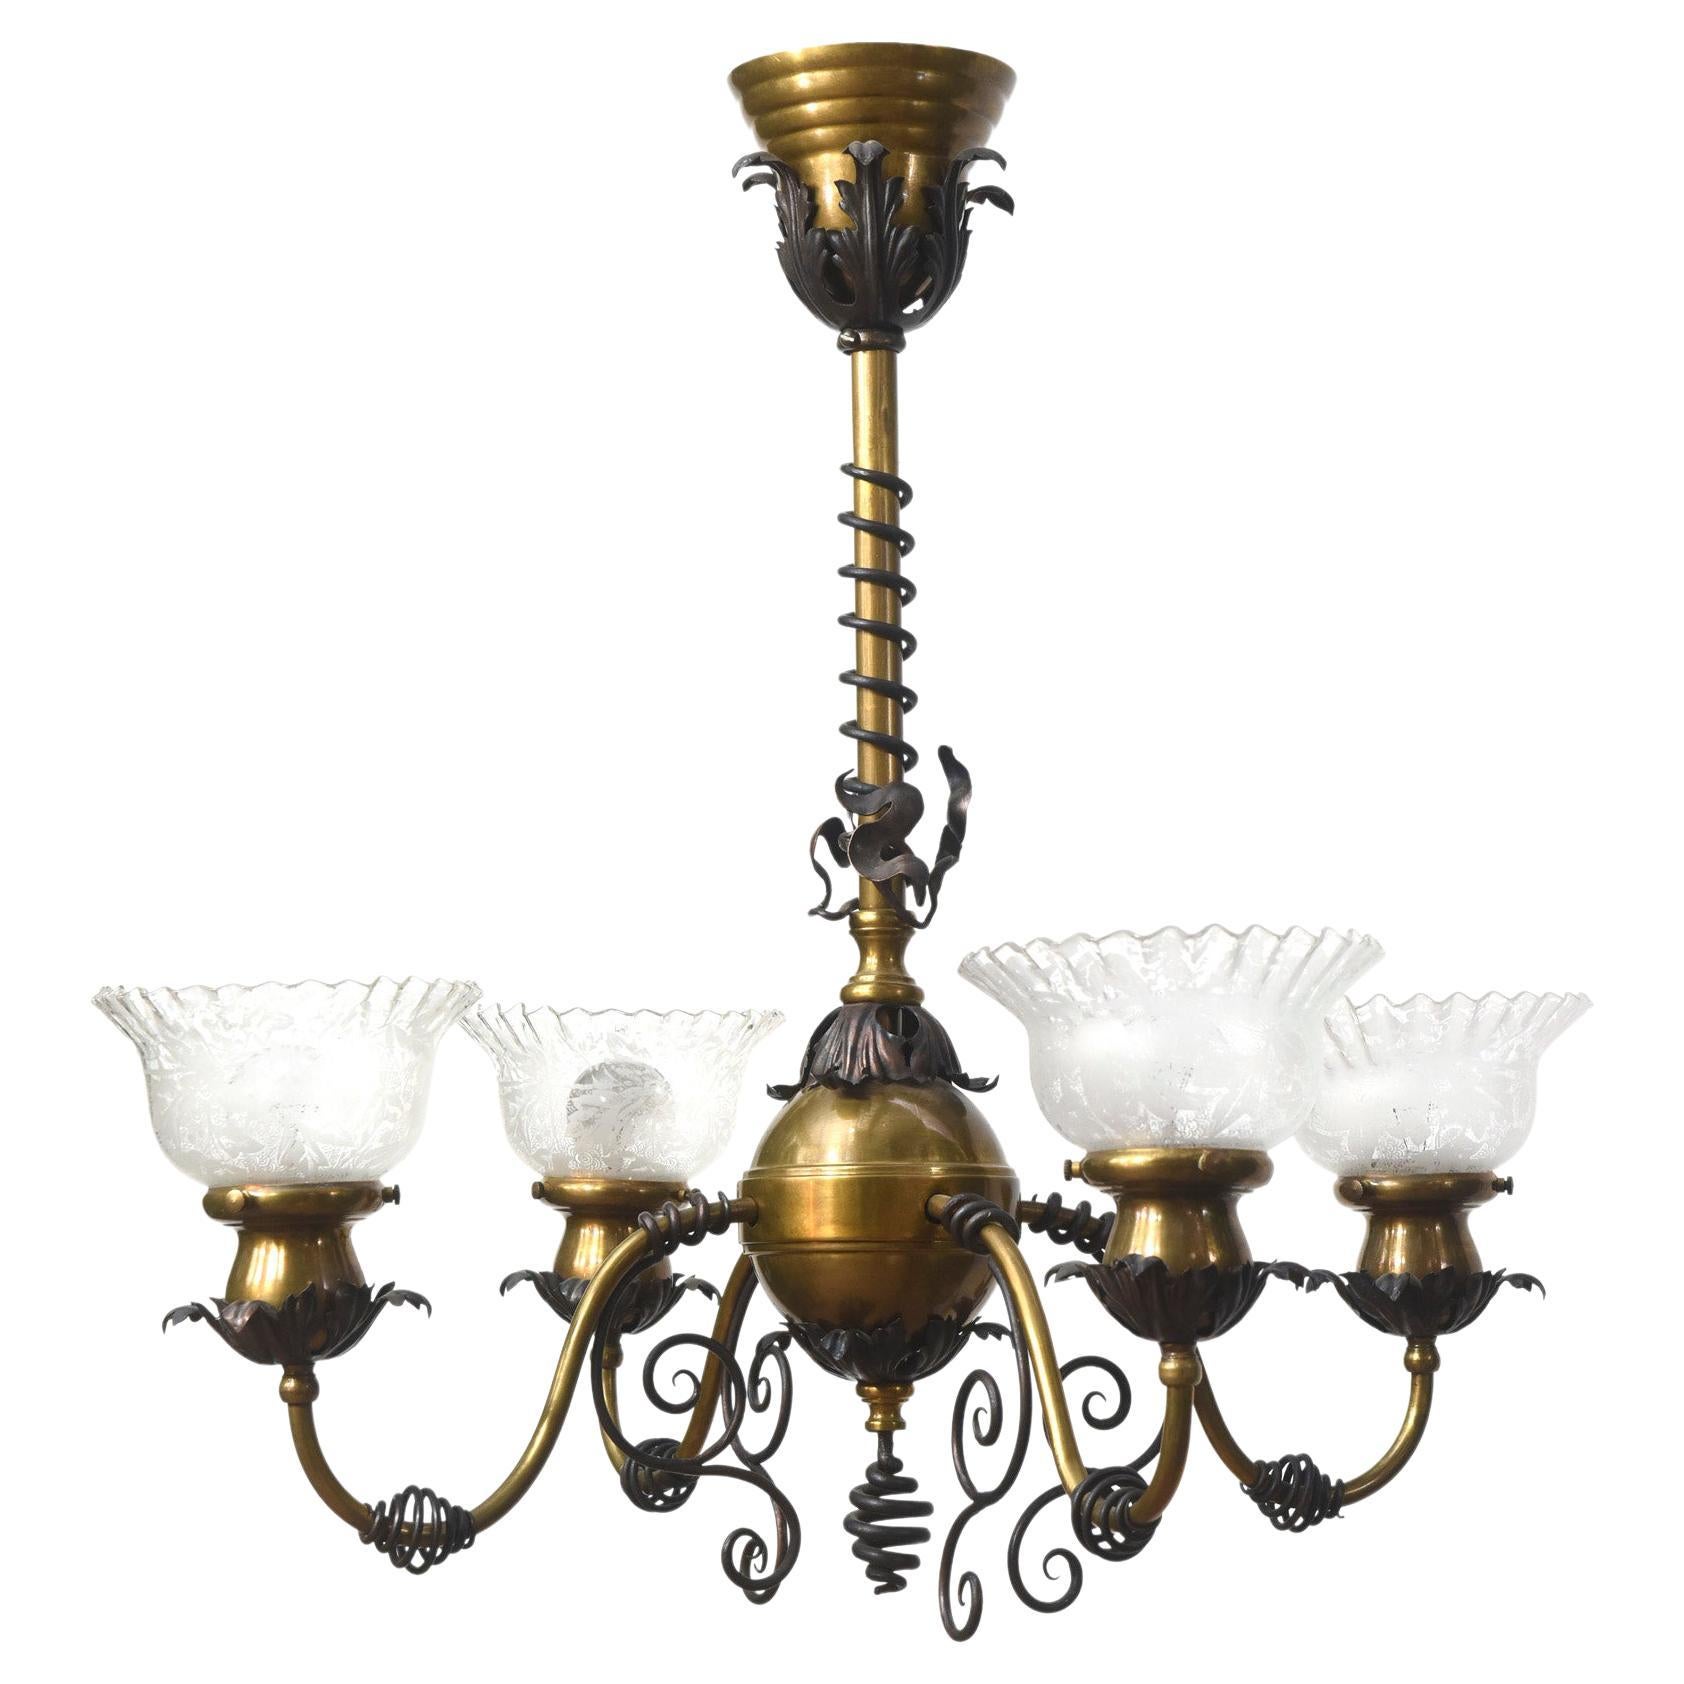 Four Light Brass and Wrought Iron Early Electric Fixture For Sale